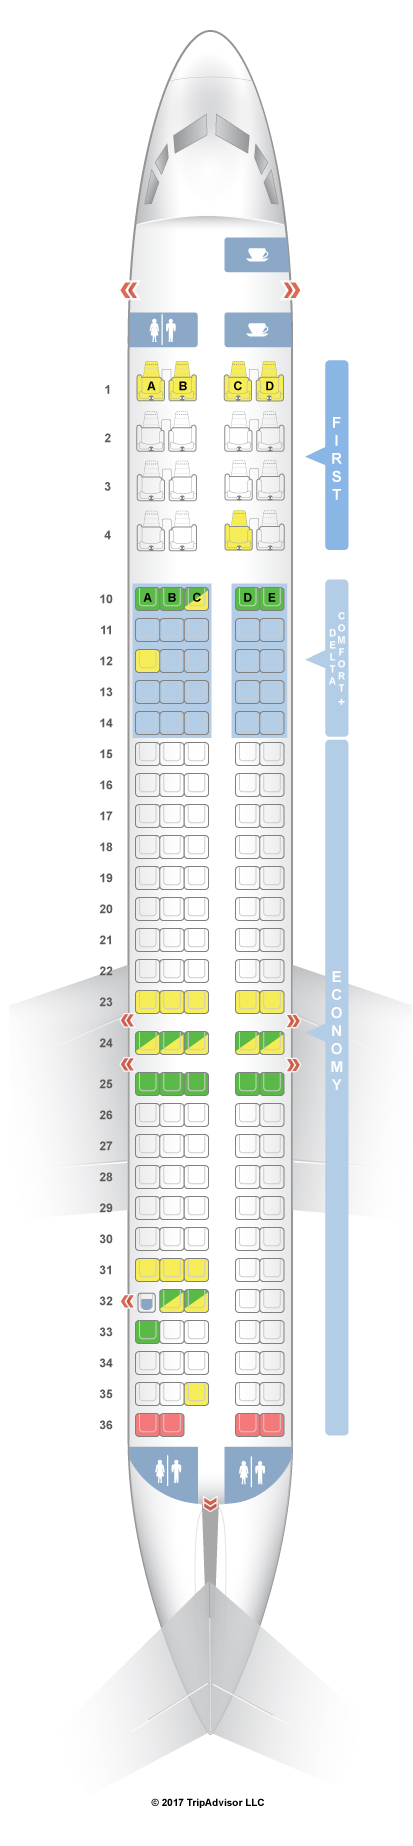 Delta Md 85 Seating Chart